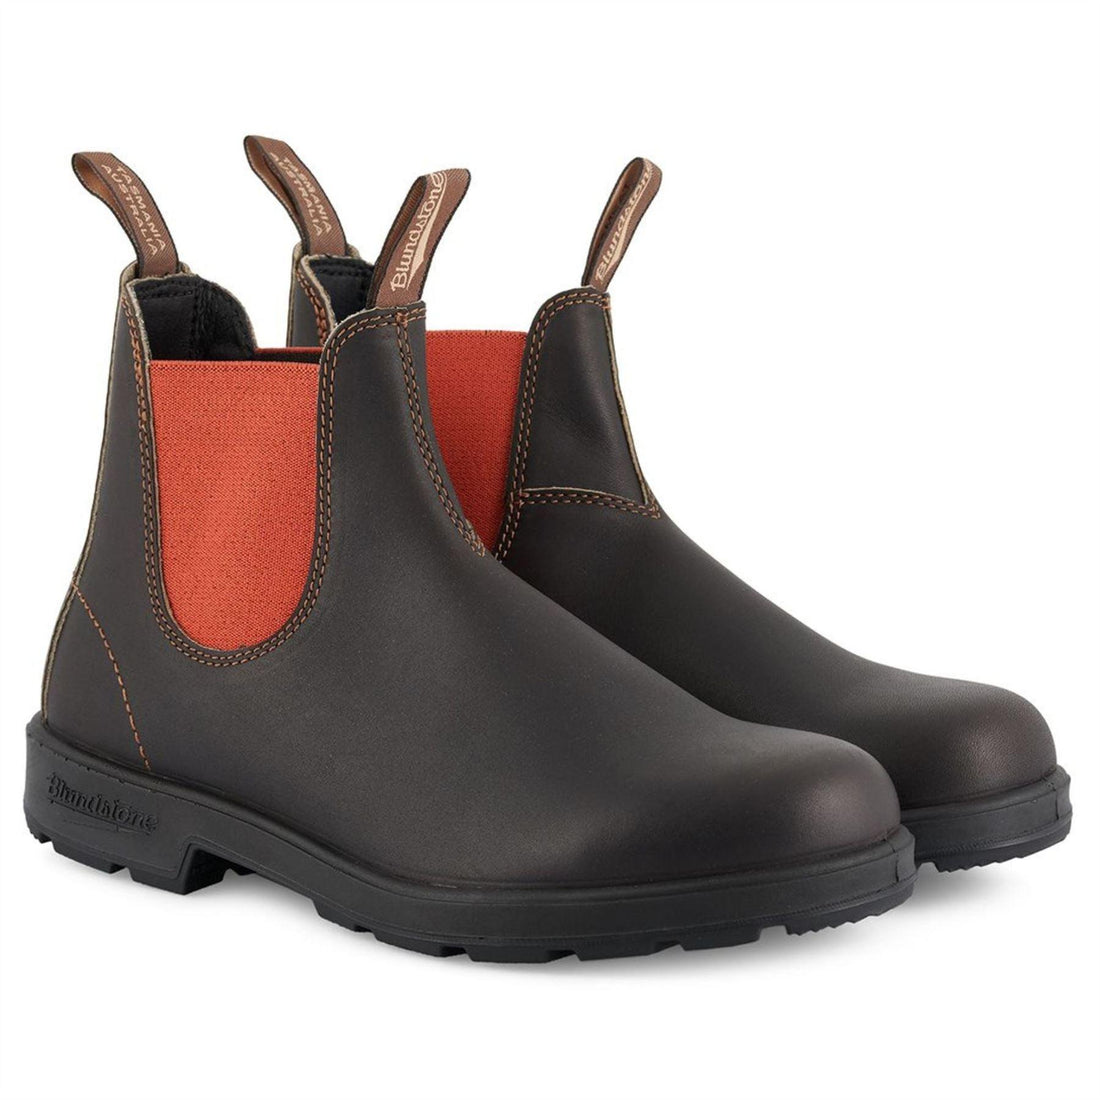 Blundstone 1918 Brown Terracotta Leather Chelsea Boots Slip On Classic Vintage - Knighthood Store